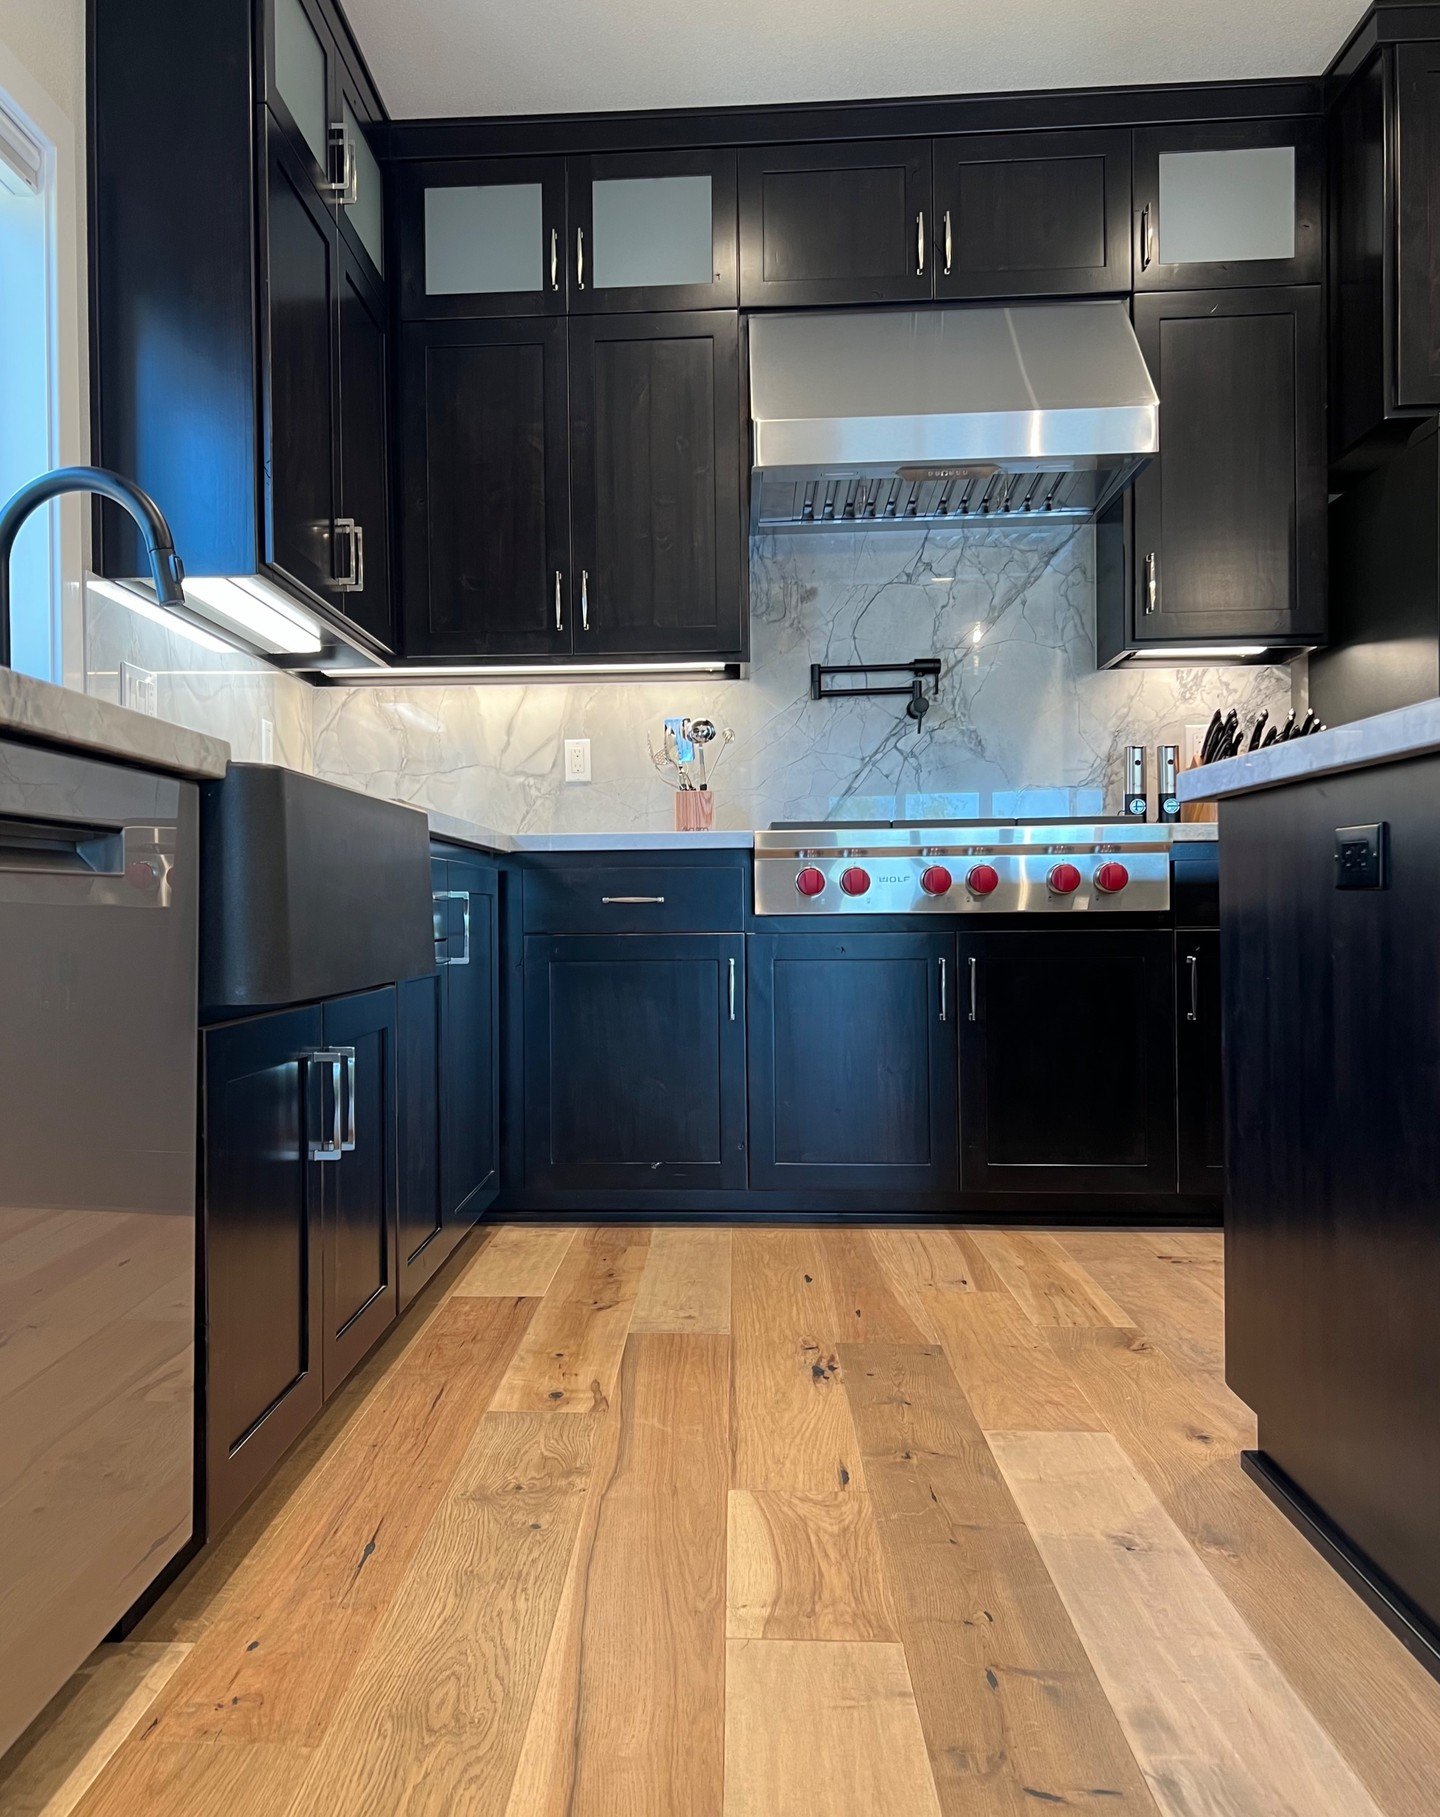 Have you ever wanted a hardwood floor, but didn't know what species of wood to get?? Well don't worry about it! This floor has Oak, Hickory, and Maple all in one floor and it gives you this phenomenal look in your home! @northwesthomes crushed this n